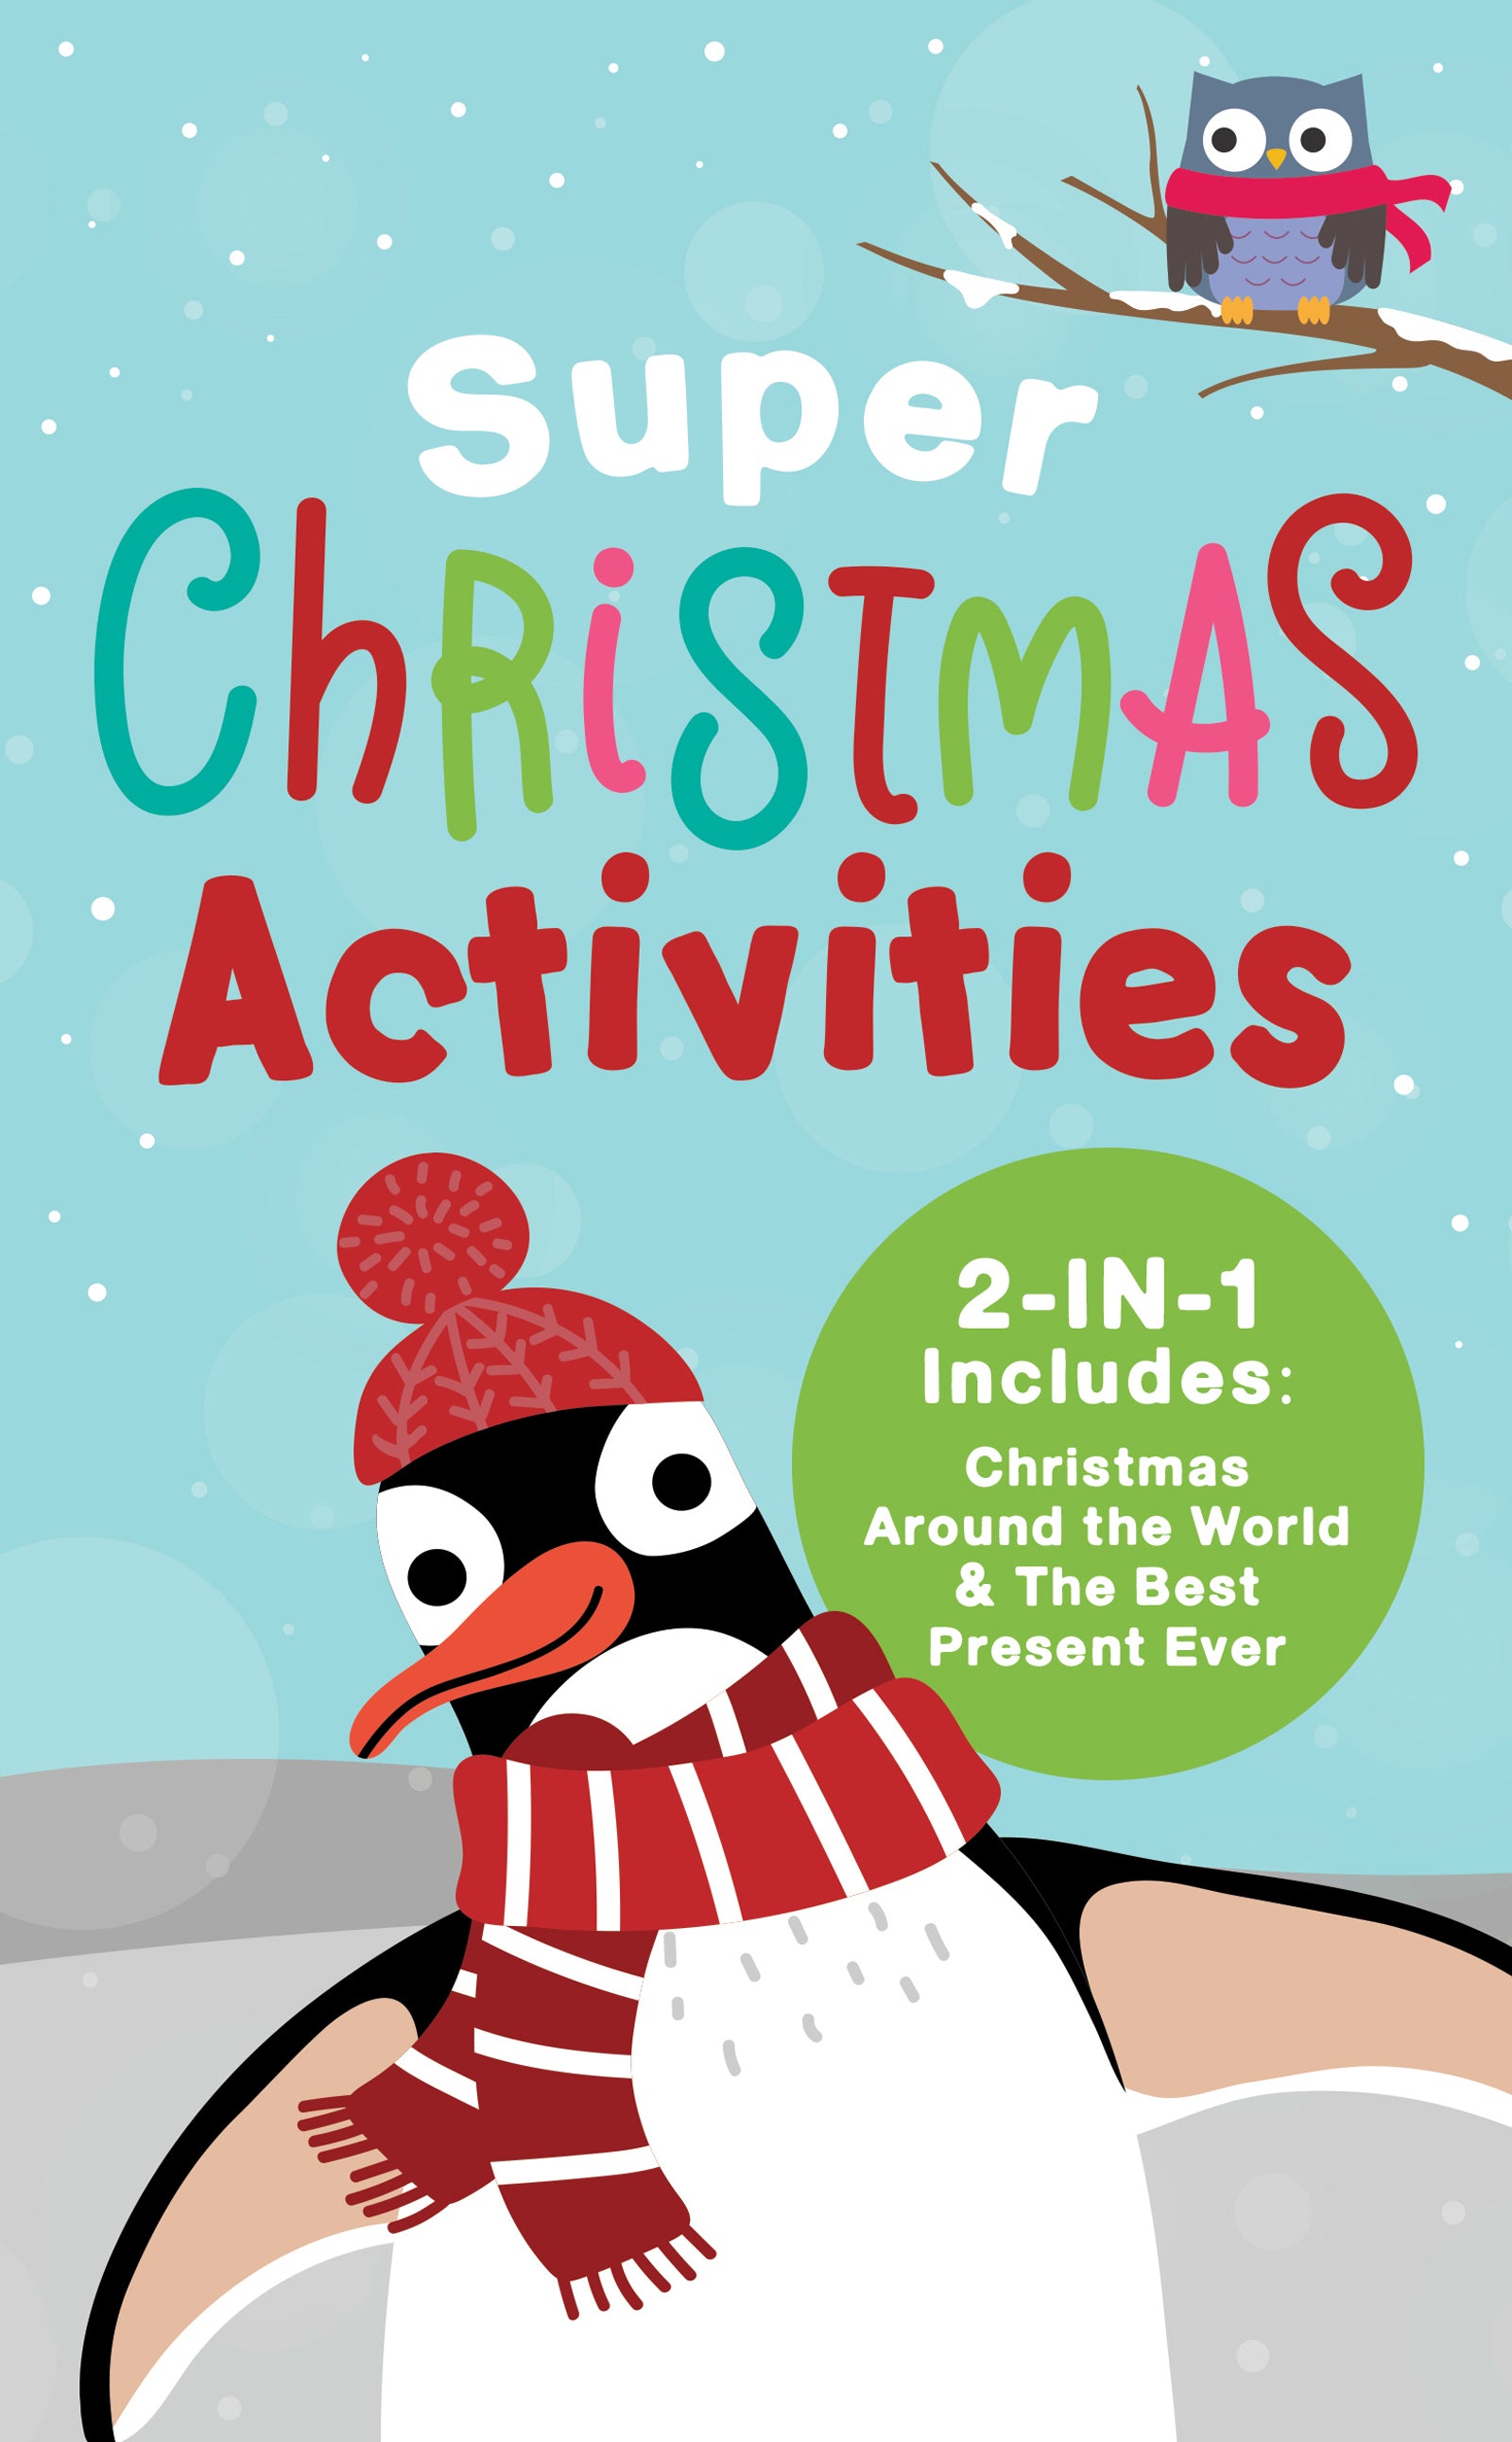 Super Christmas Activities 2-in-1 - The Christian Gift Company